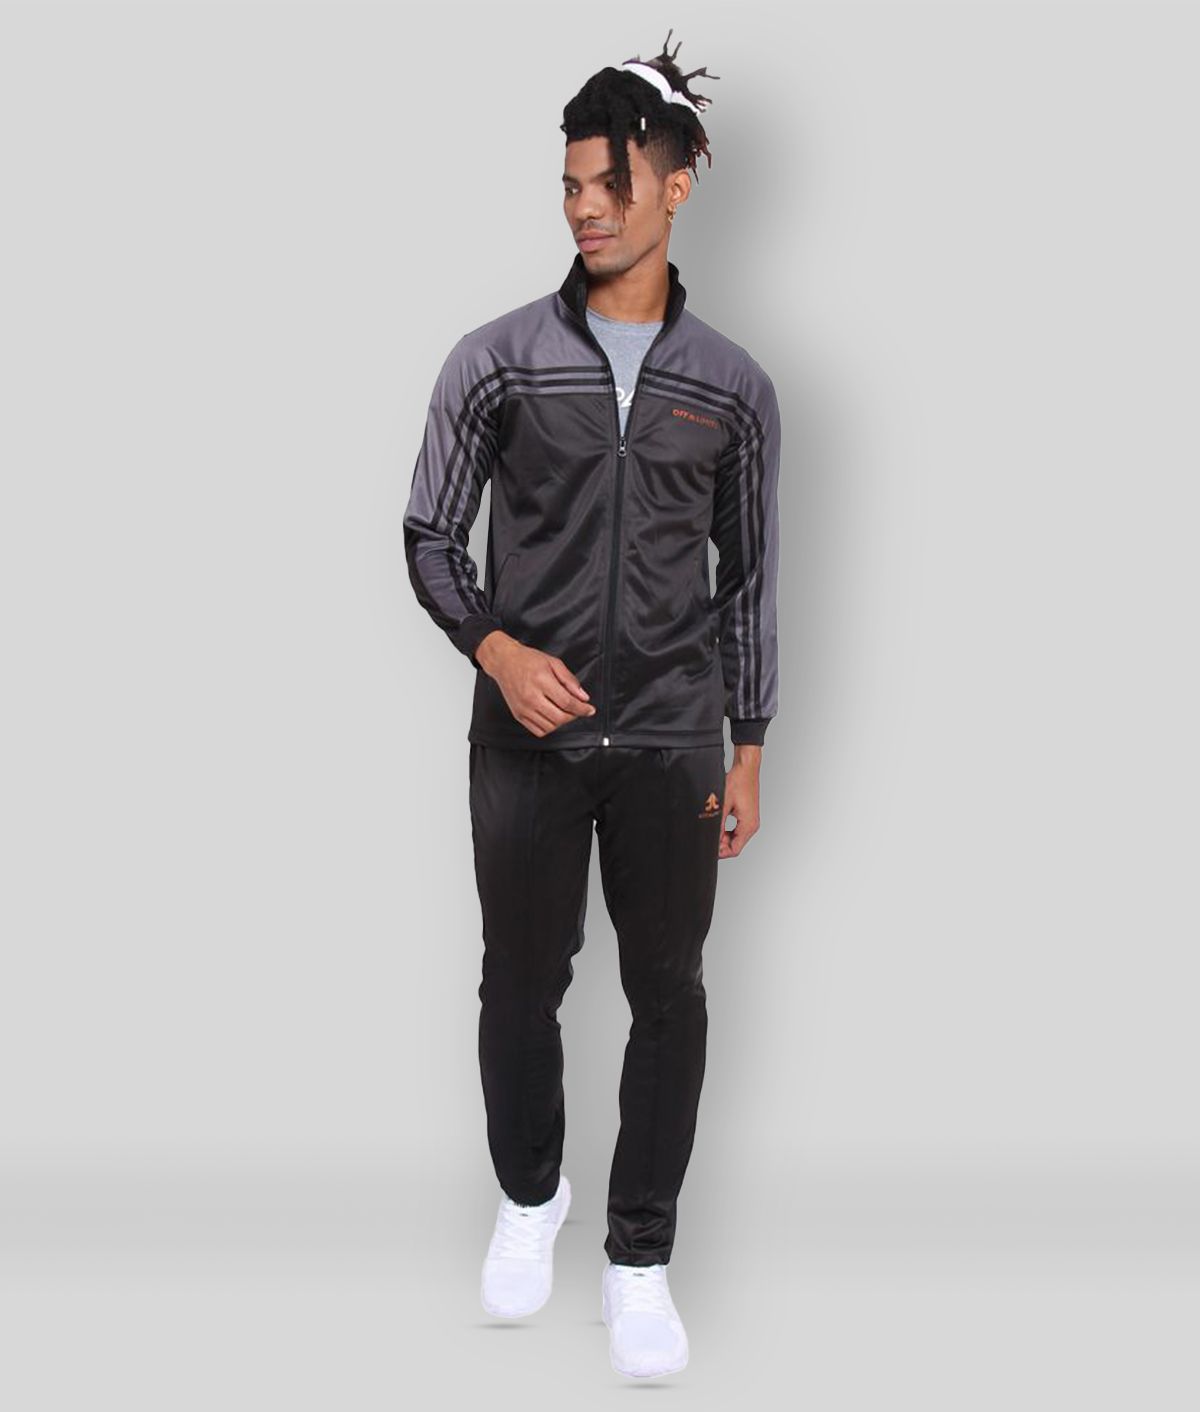     			OFF LIMITS - Black Polyester Regular Fit Striped Men's Sports Tracksuit ( Pack of 1 )